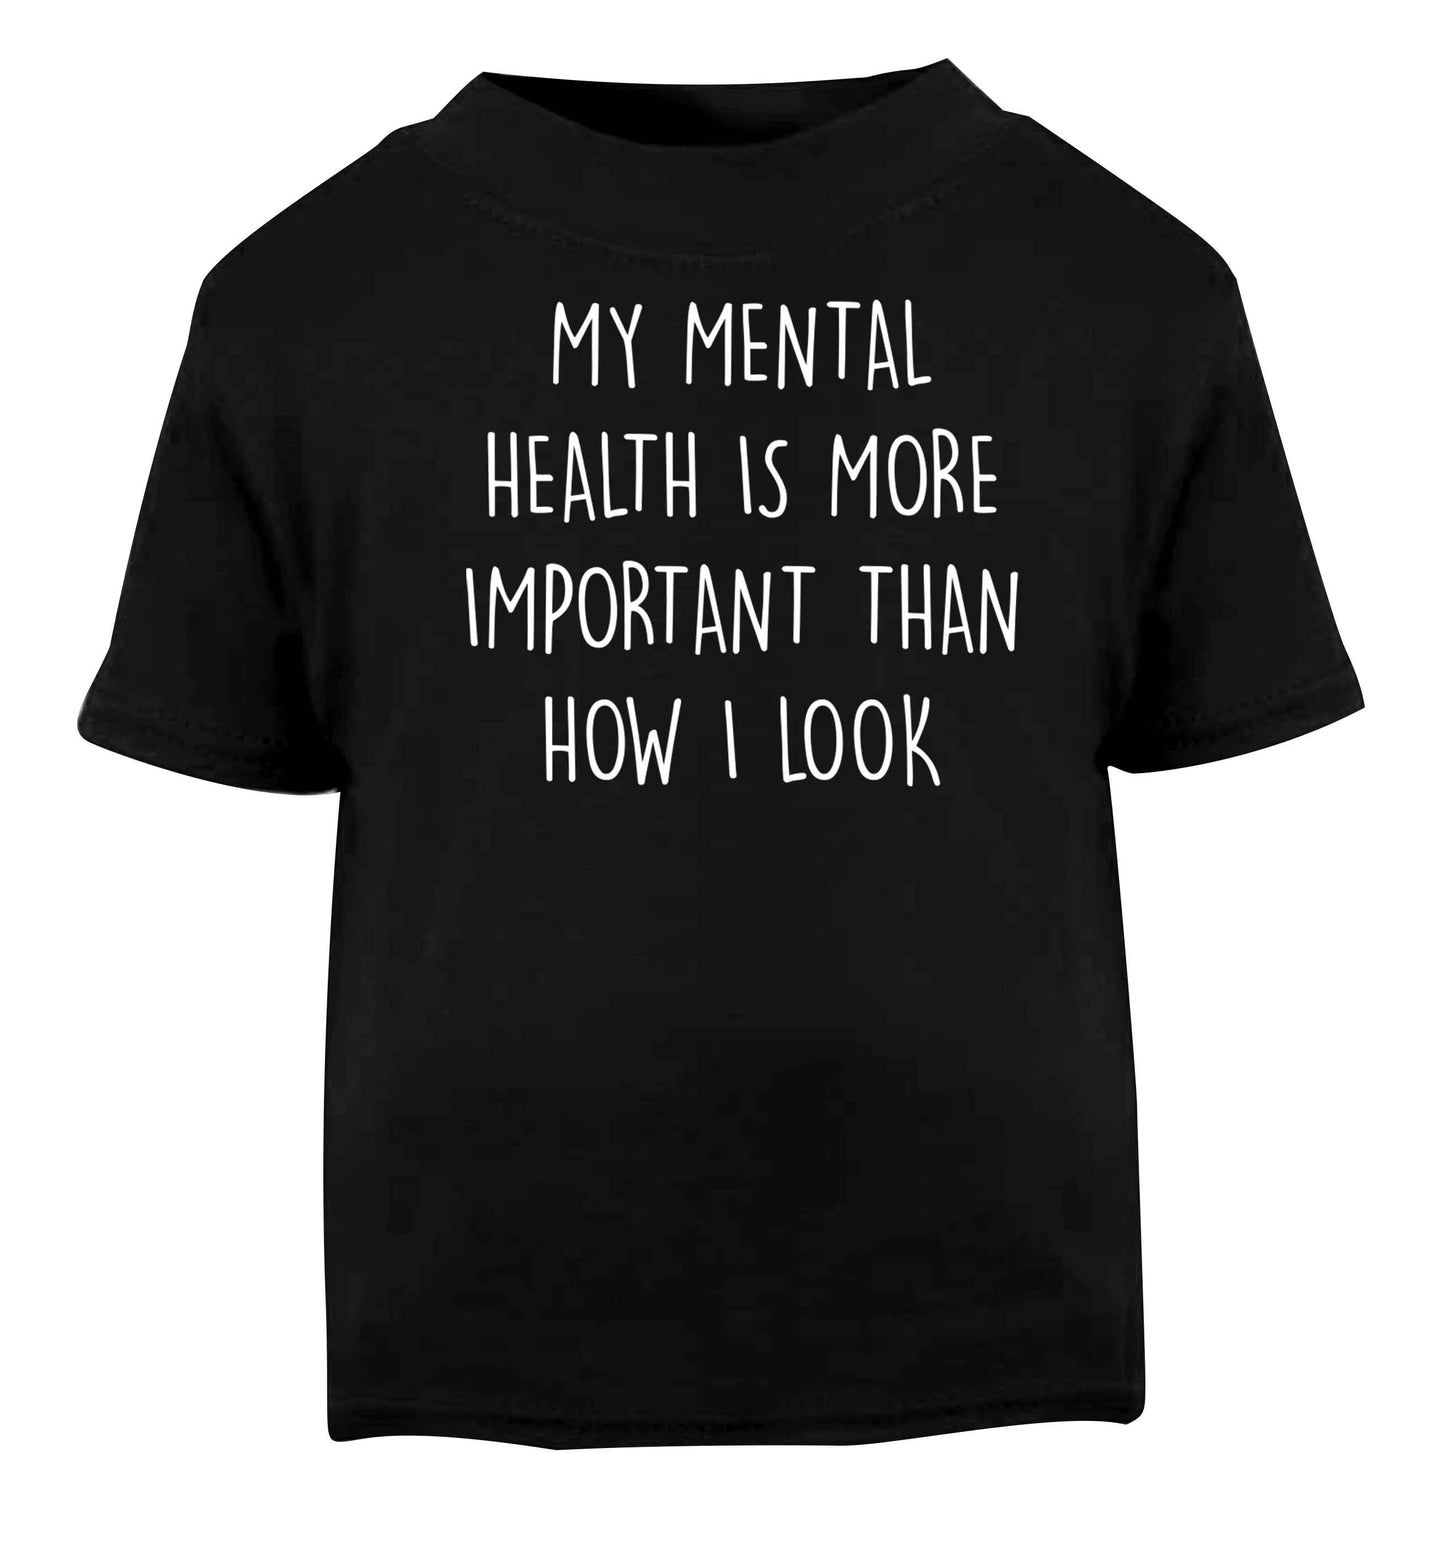 My mental health is more importnat than how I look Black baby toddler Tshirt 2 years